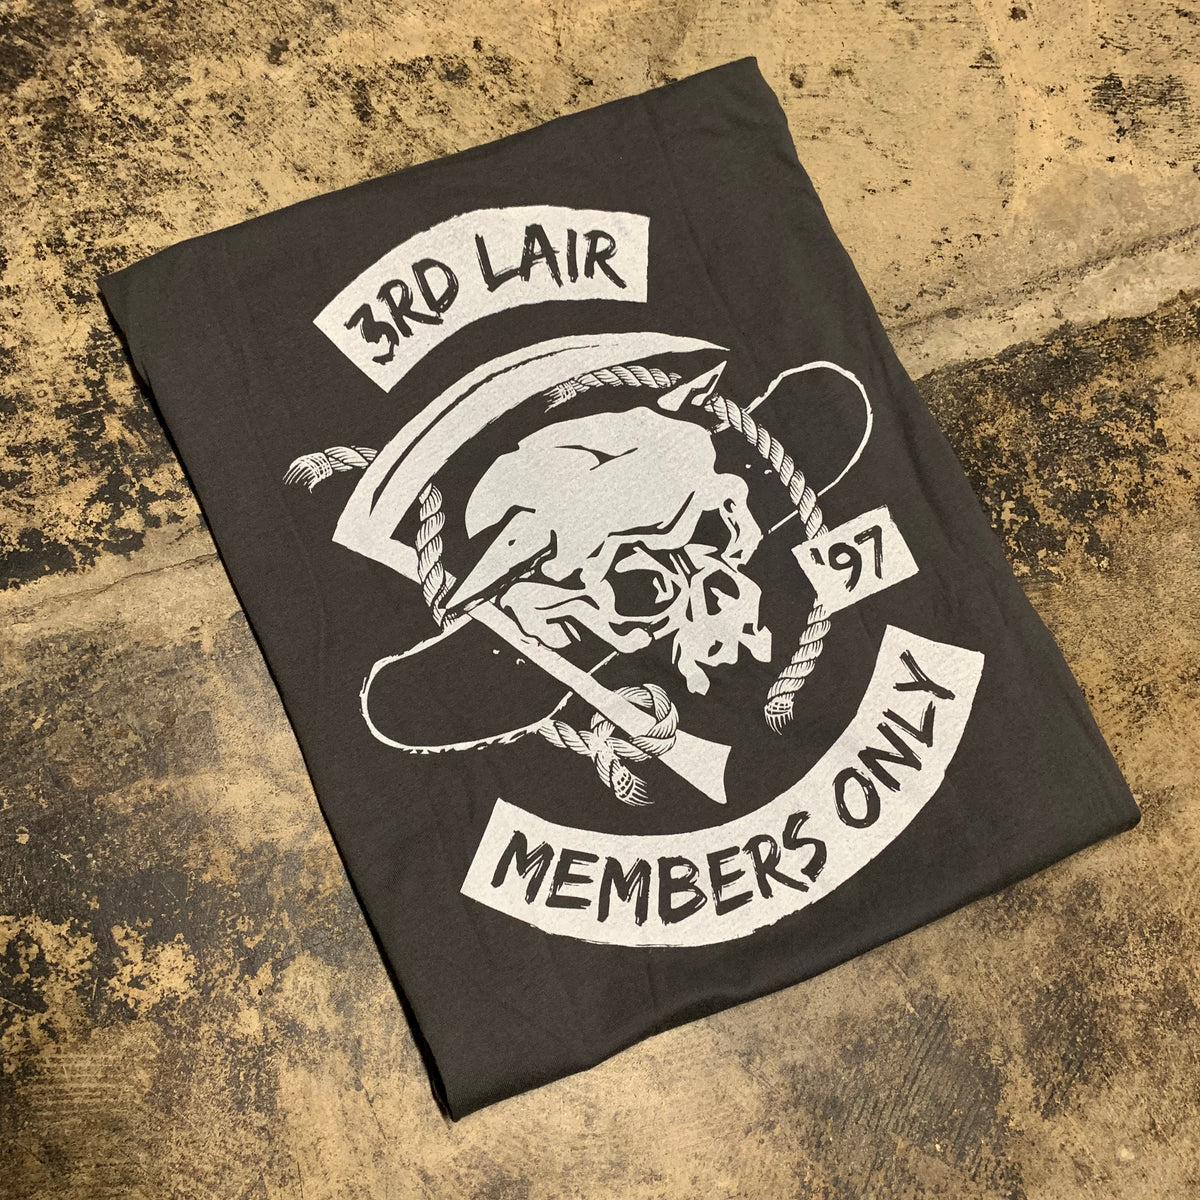 Hours, Rates, and Memberships – 3rd Lair